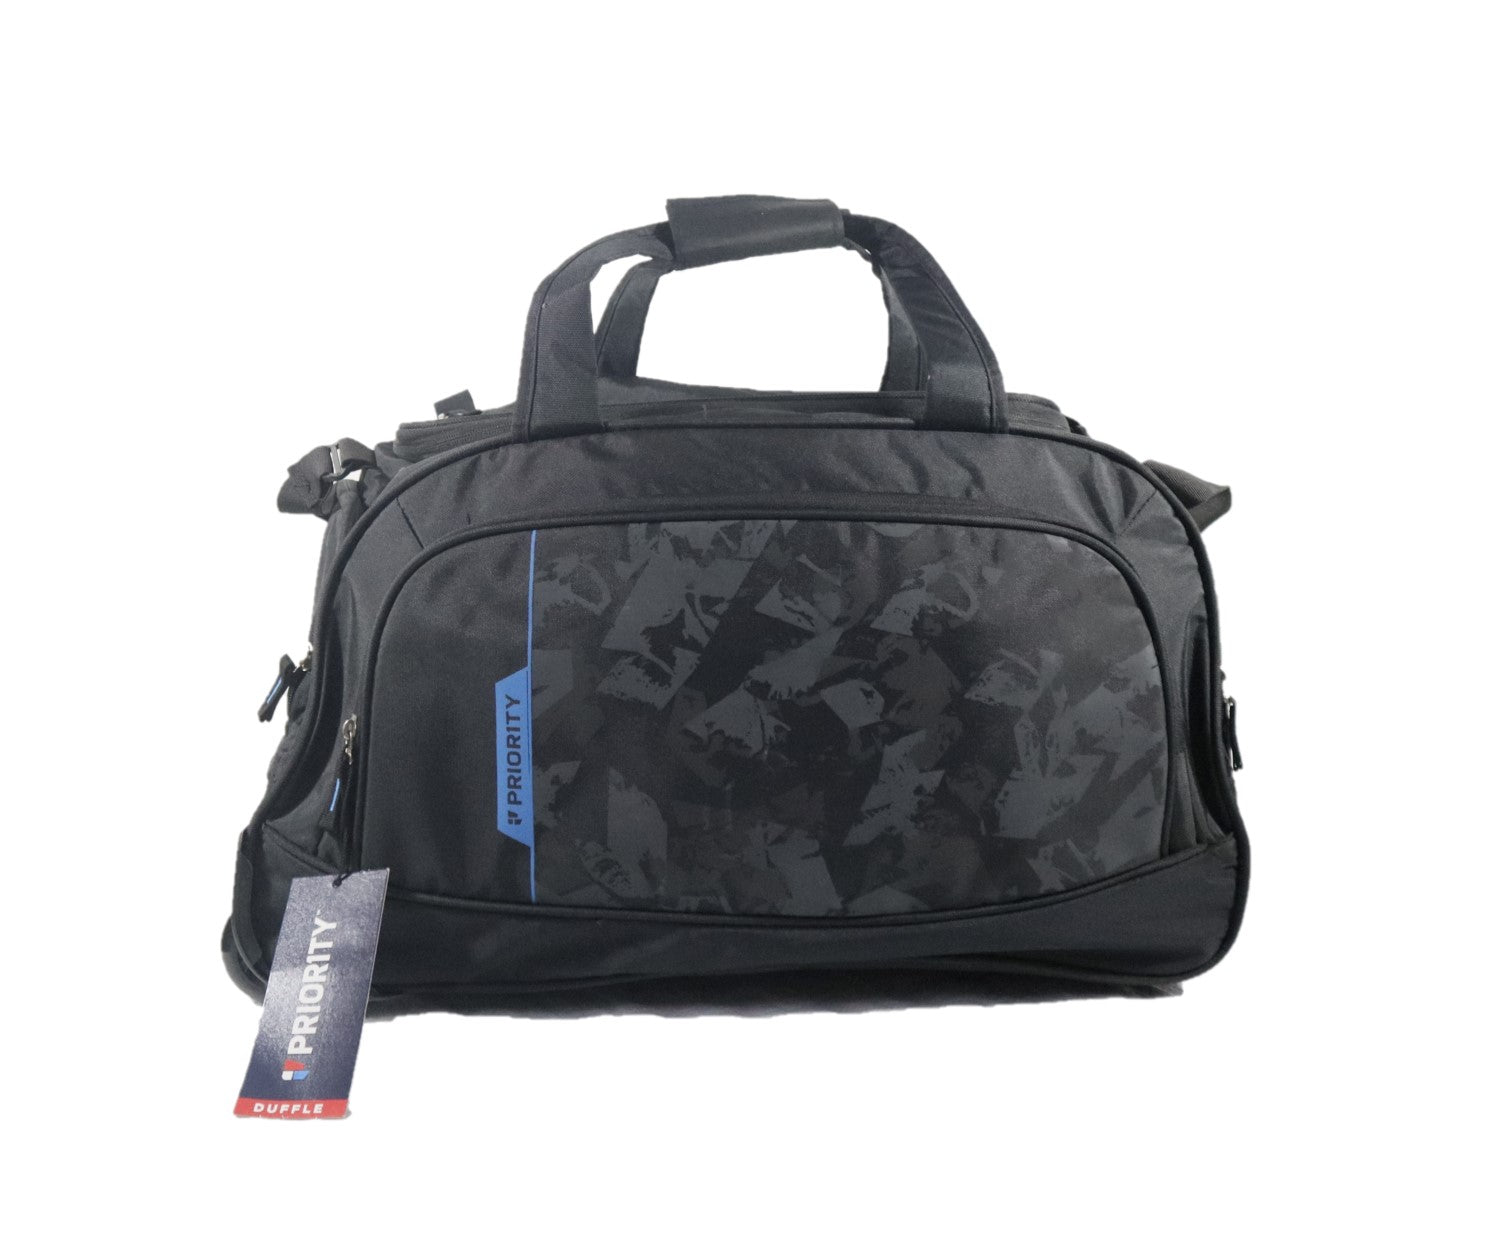 The Priority METRO 002 Polyester 2 Wheel Duffle Trolley Bag is the perfect travel companion